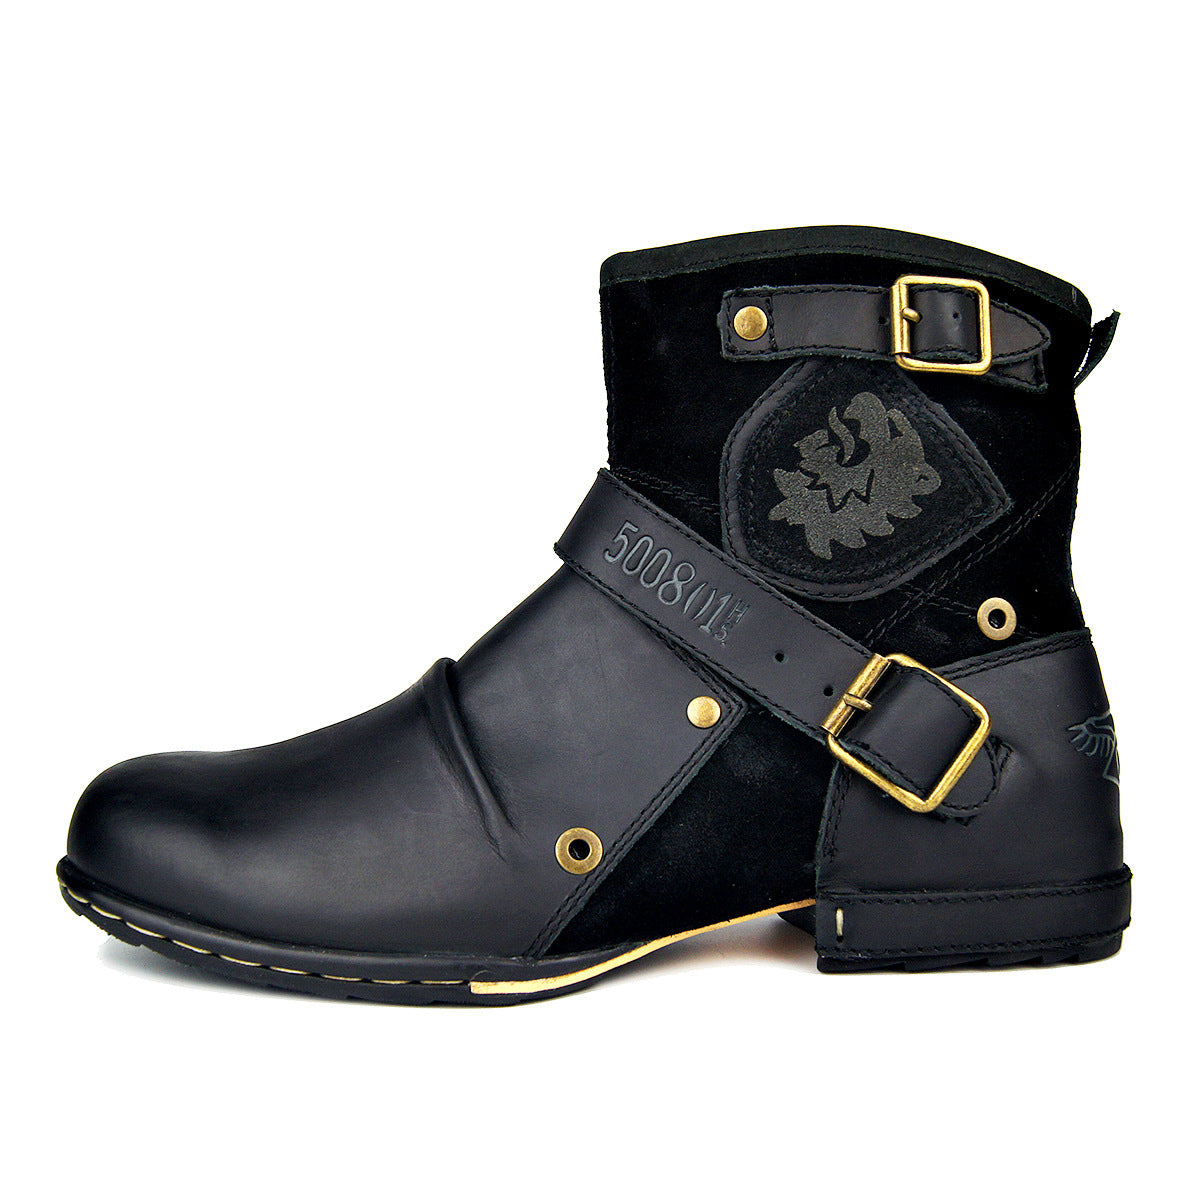 Men's leather Martin boots